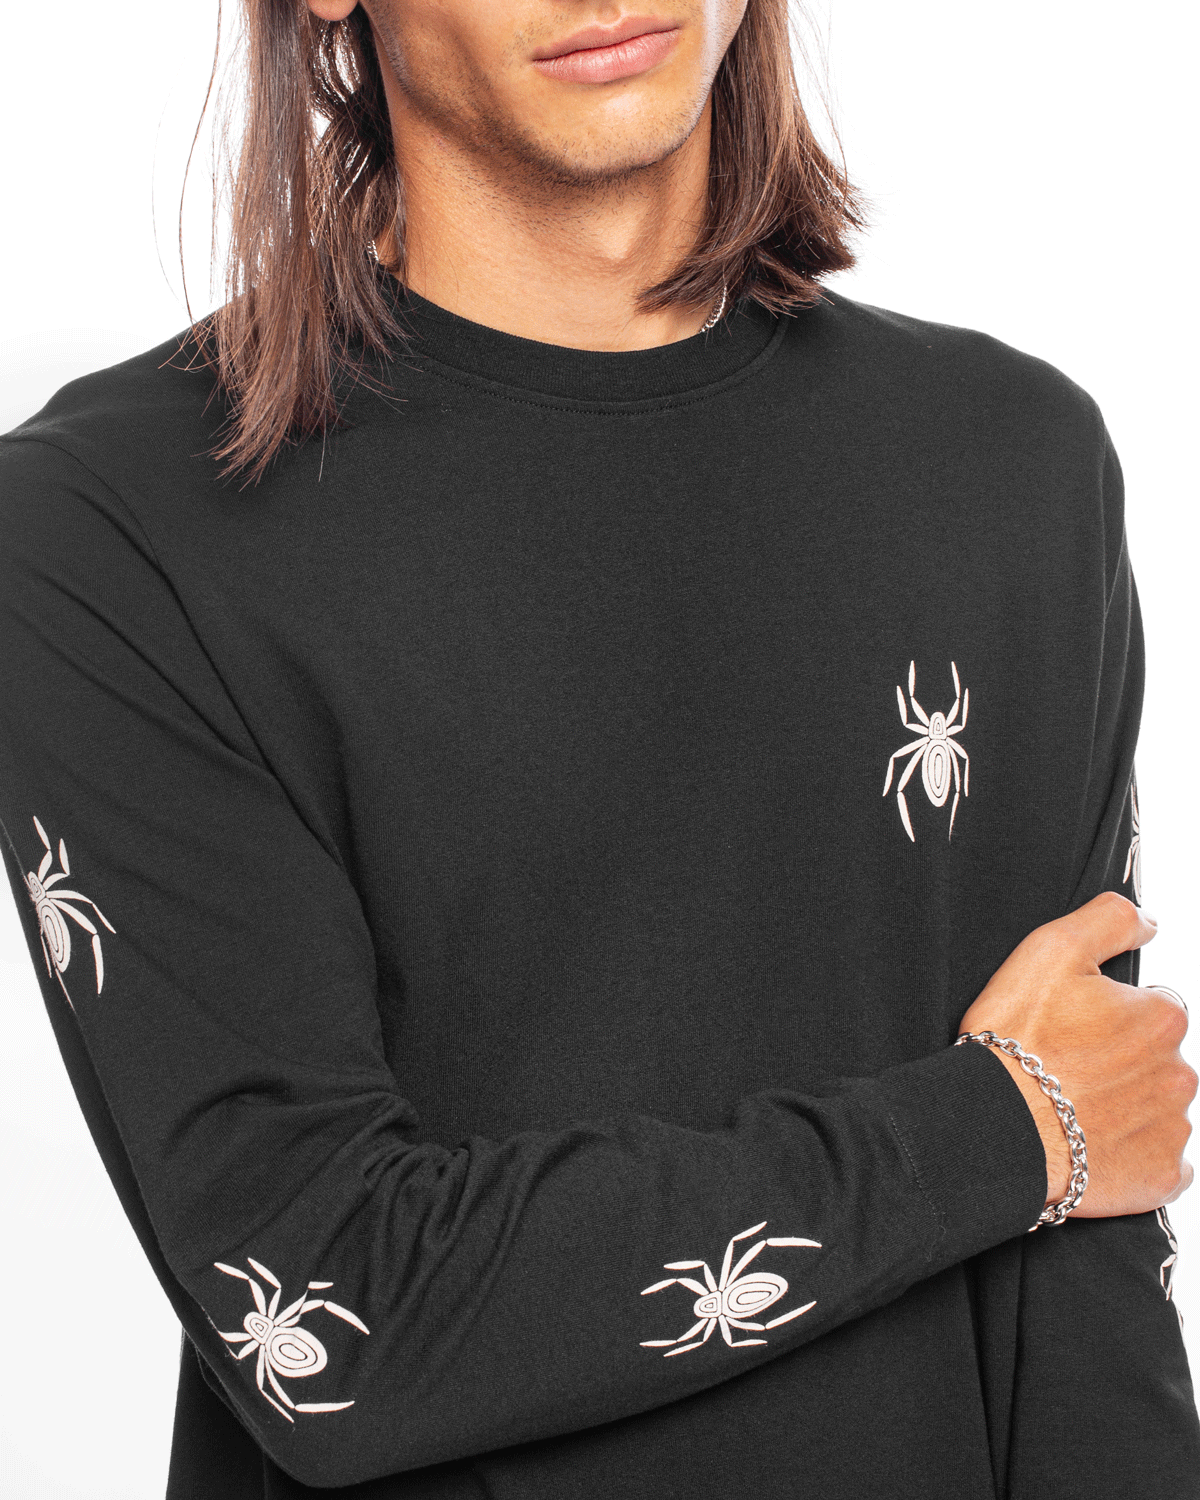 Spidered Long Sleeve T-Shirt Black